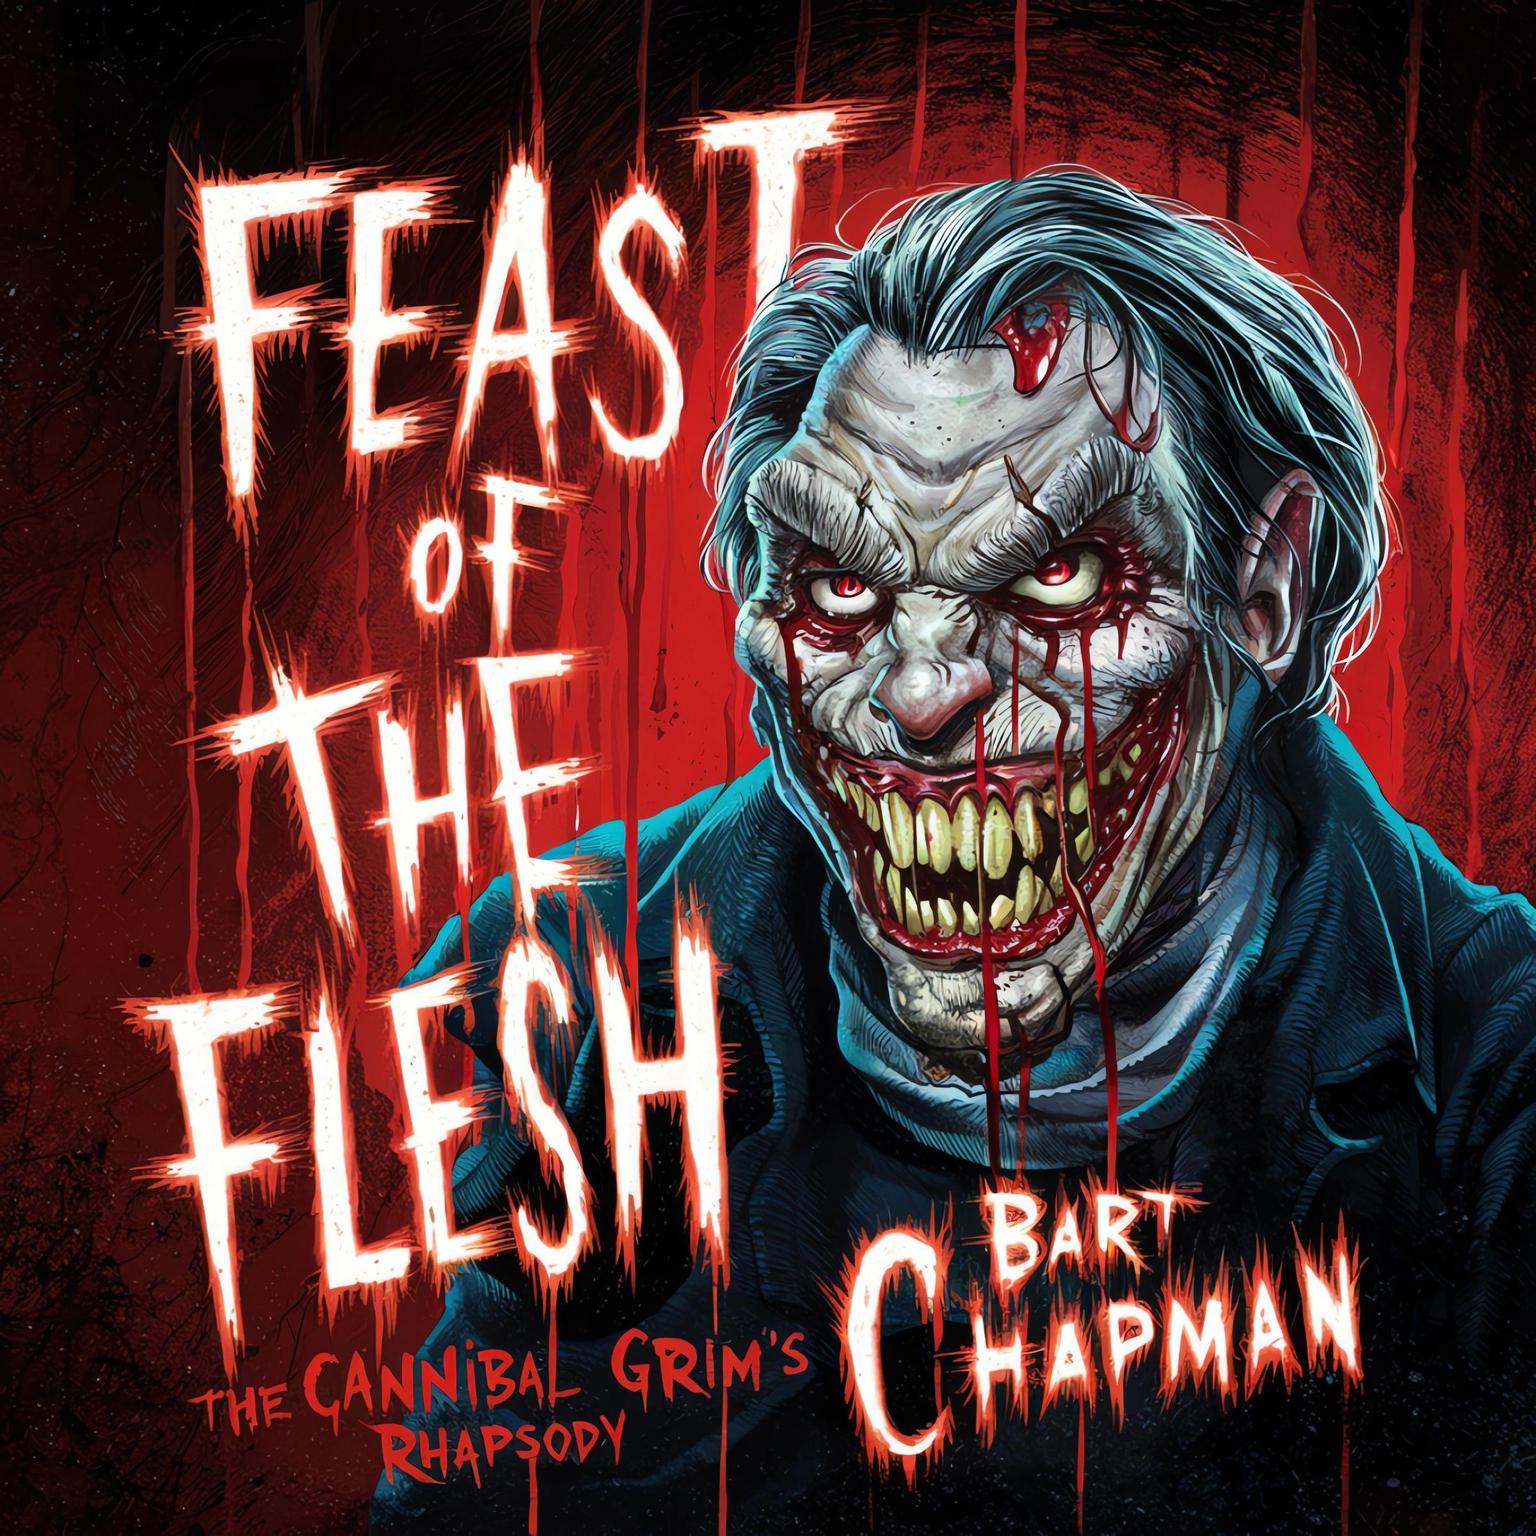 Feast Of The Flesh: The Cannibal Grims Rhapsody Audiobook, by Bart Chapman